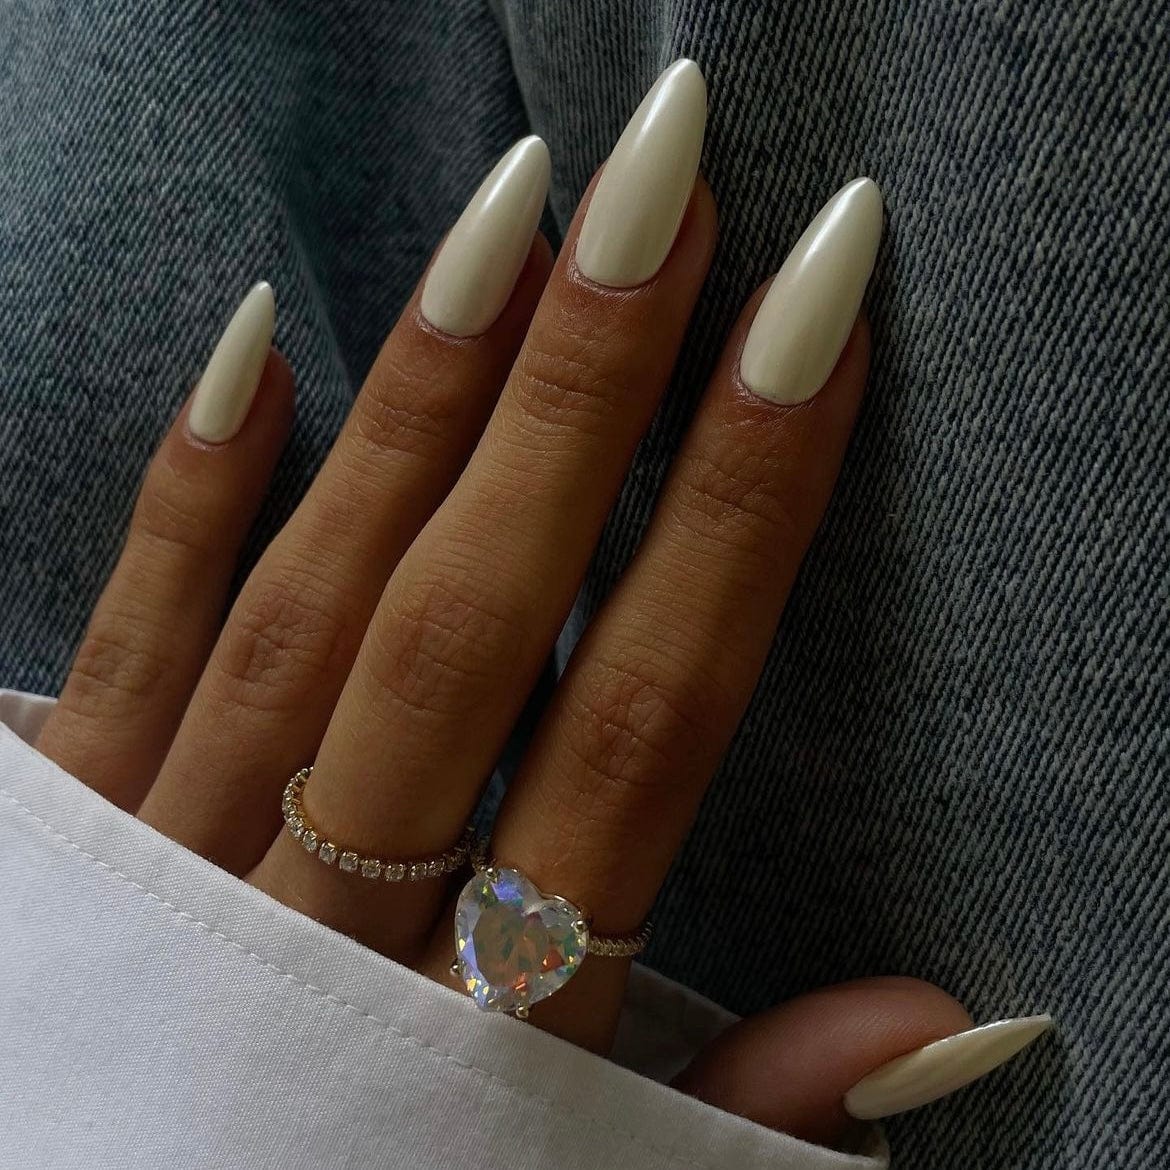 Step into sophistication with our exquisite white nail designs. From minimalist chic to intricate patterns, our collection offers a myriad of options to suit every style.